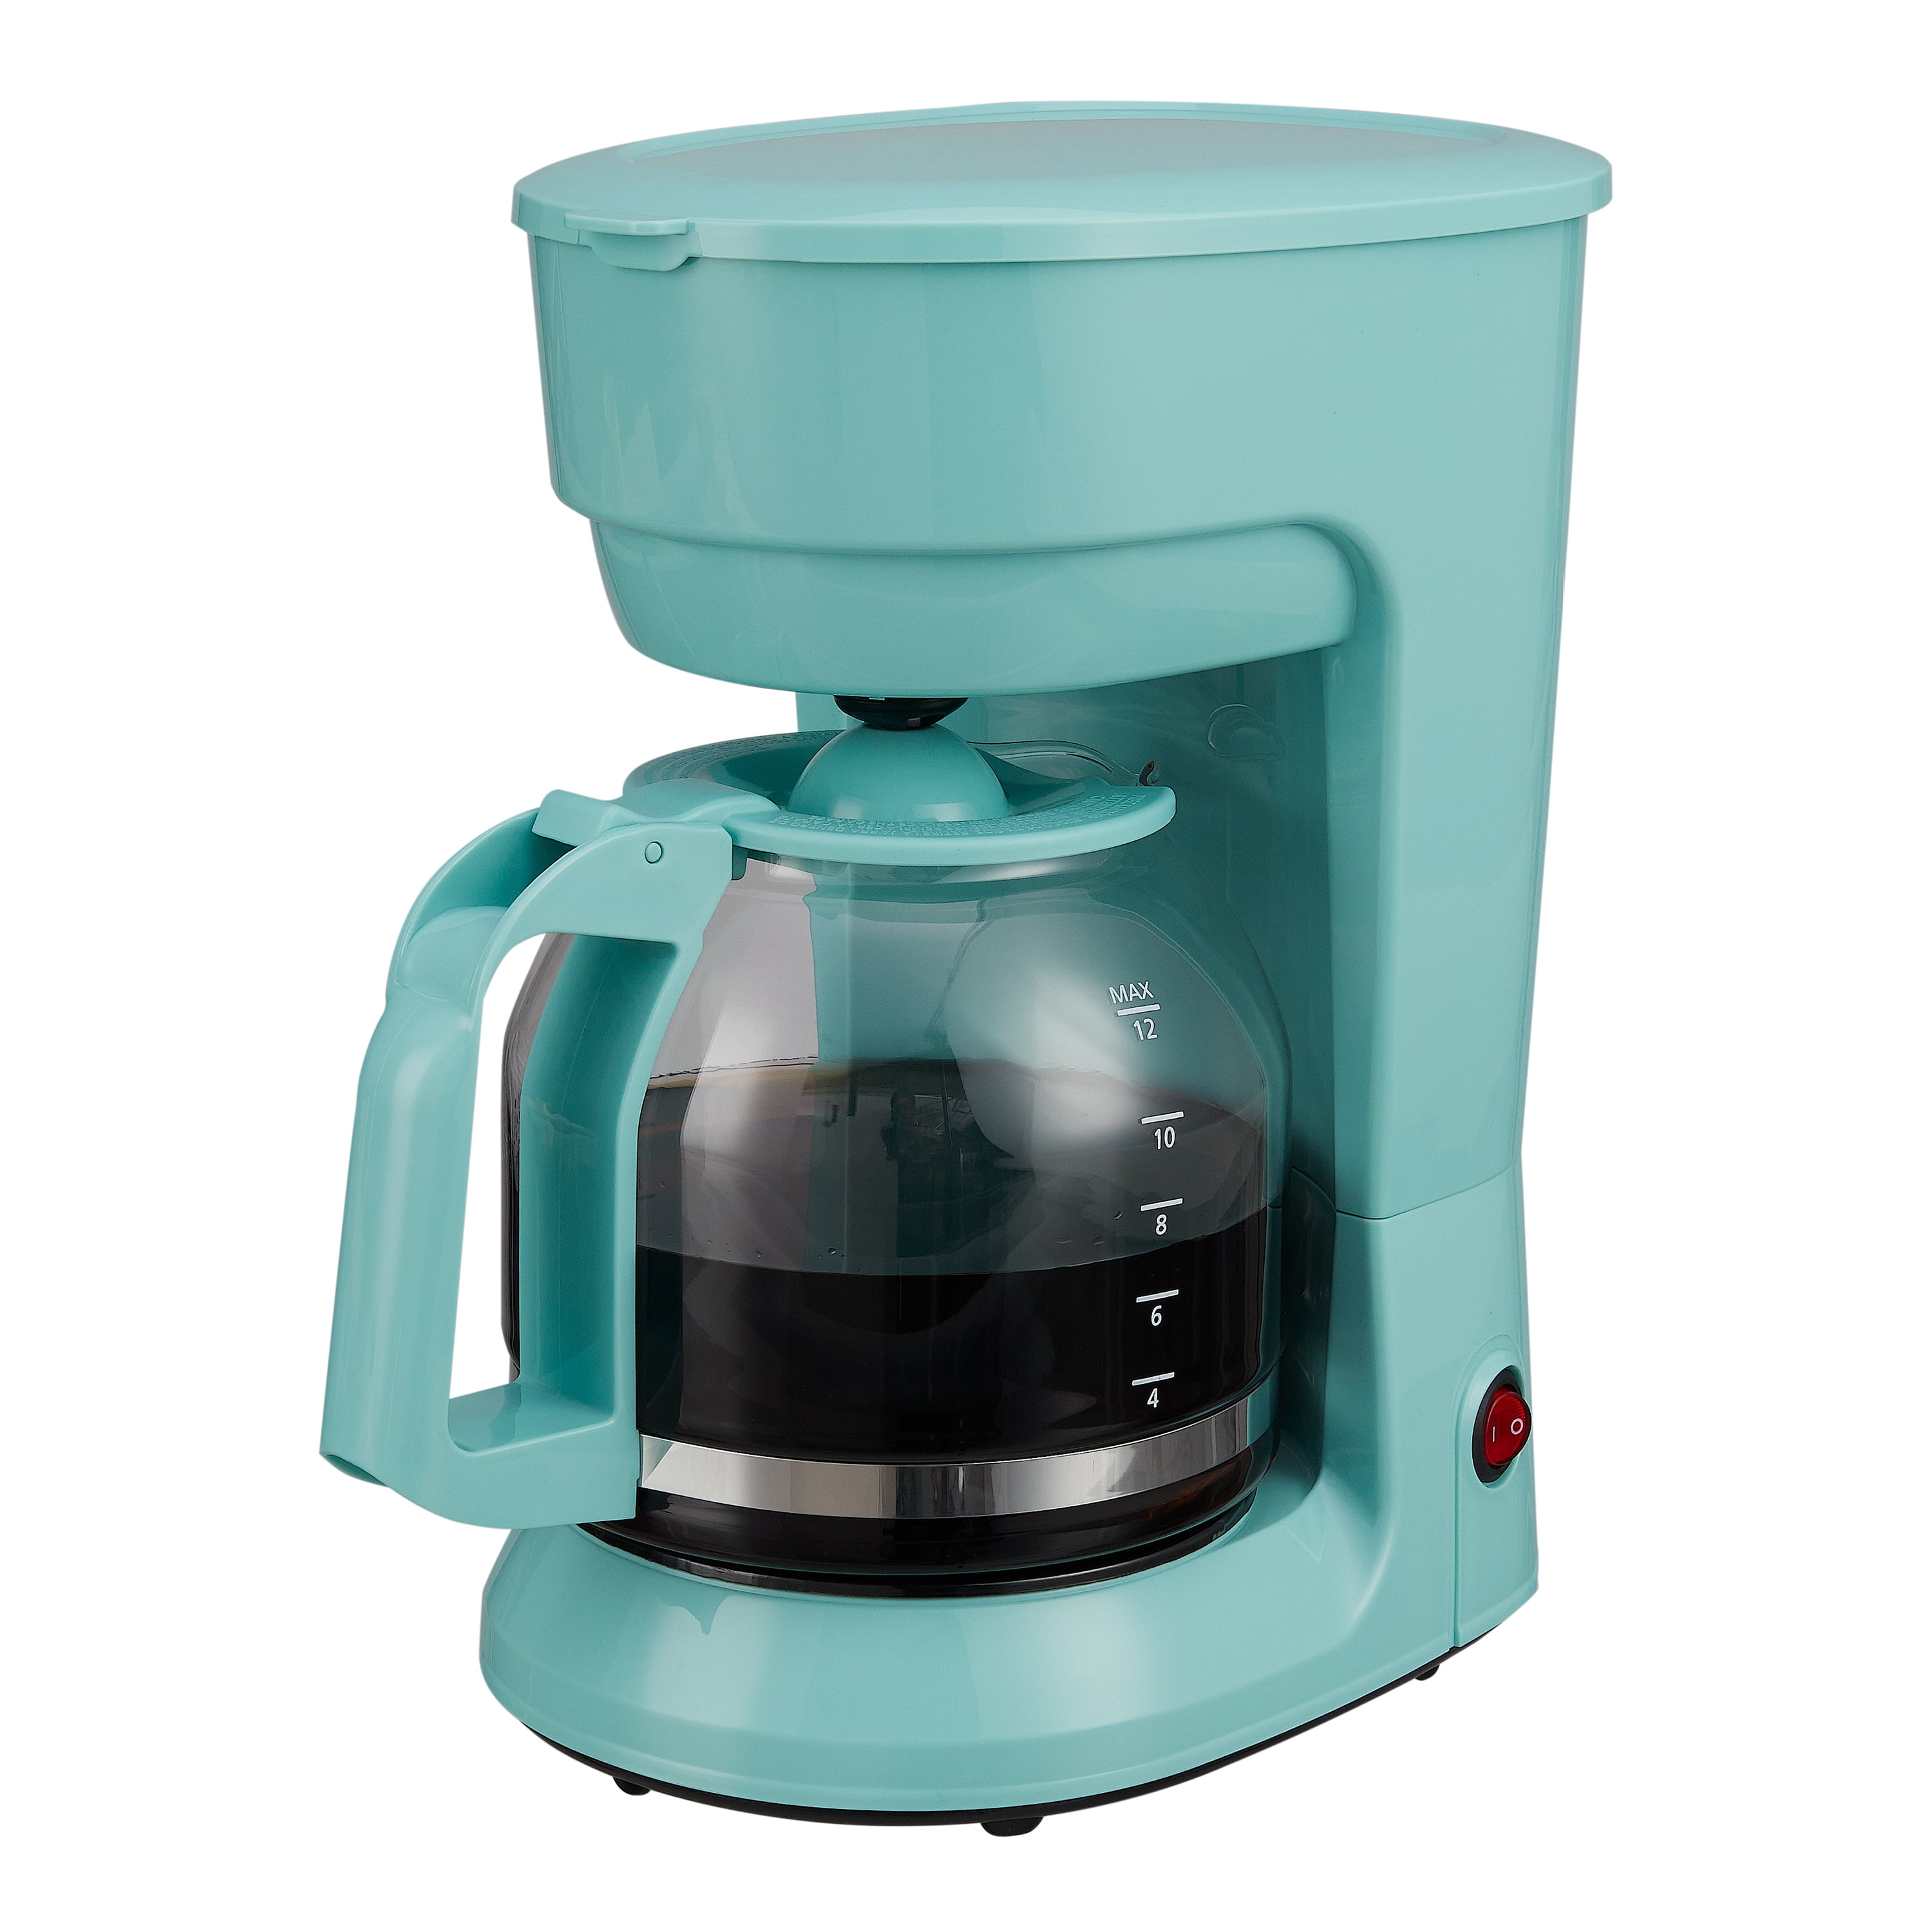 Mainstays 12-Cup Glass Carafe Coffee Maker, Mint Green 